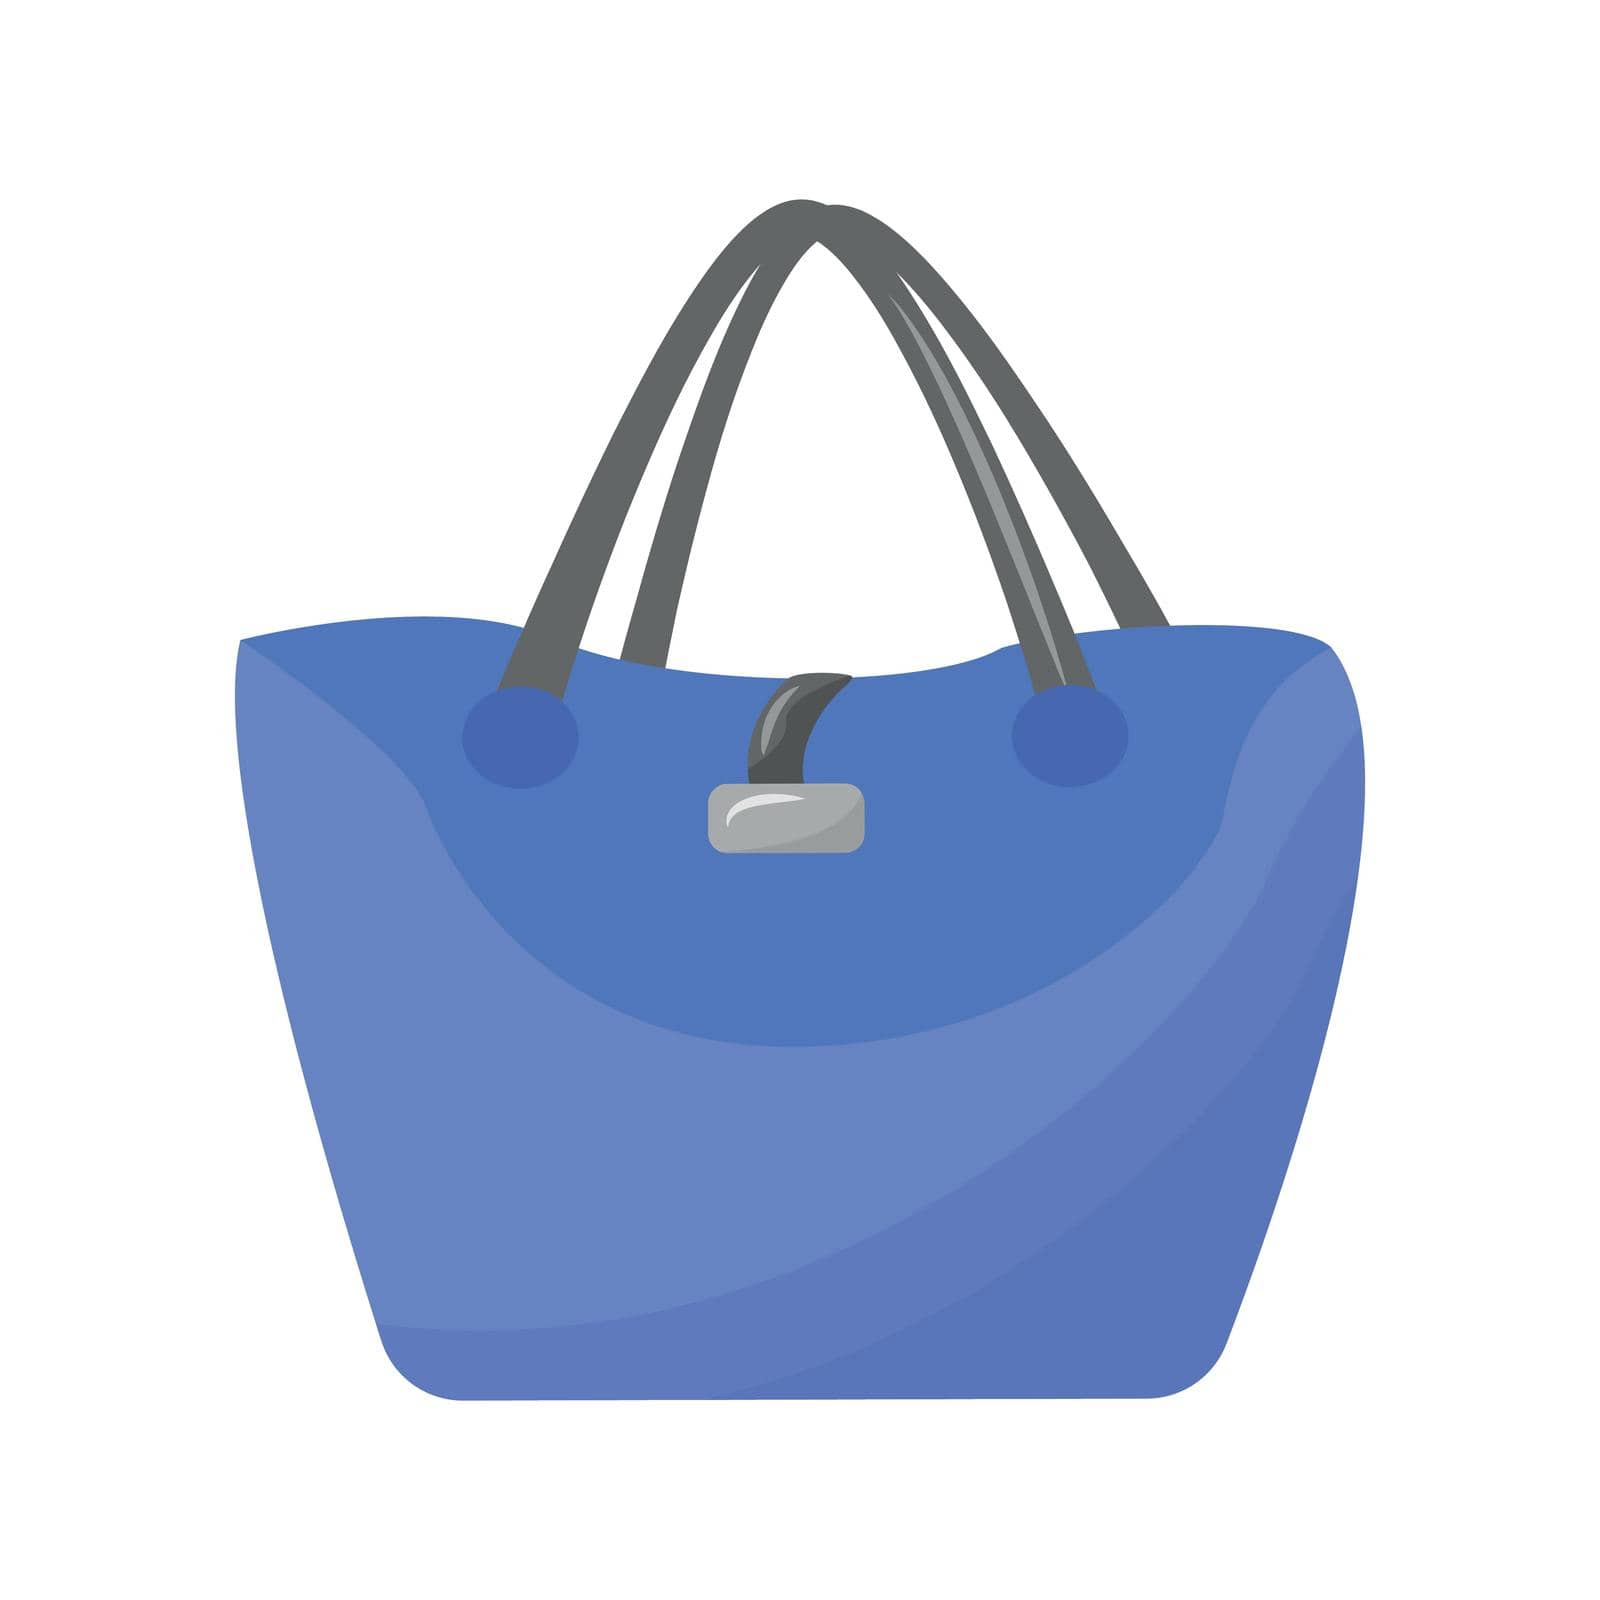 Blue bag semi flat color vector element. Full sized object on white. Woman elegant purse. Casual and smart handbag simple cartoon style illustration for web graphic design and animation